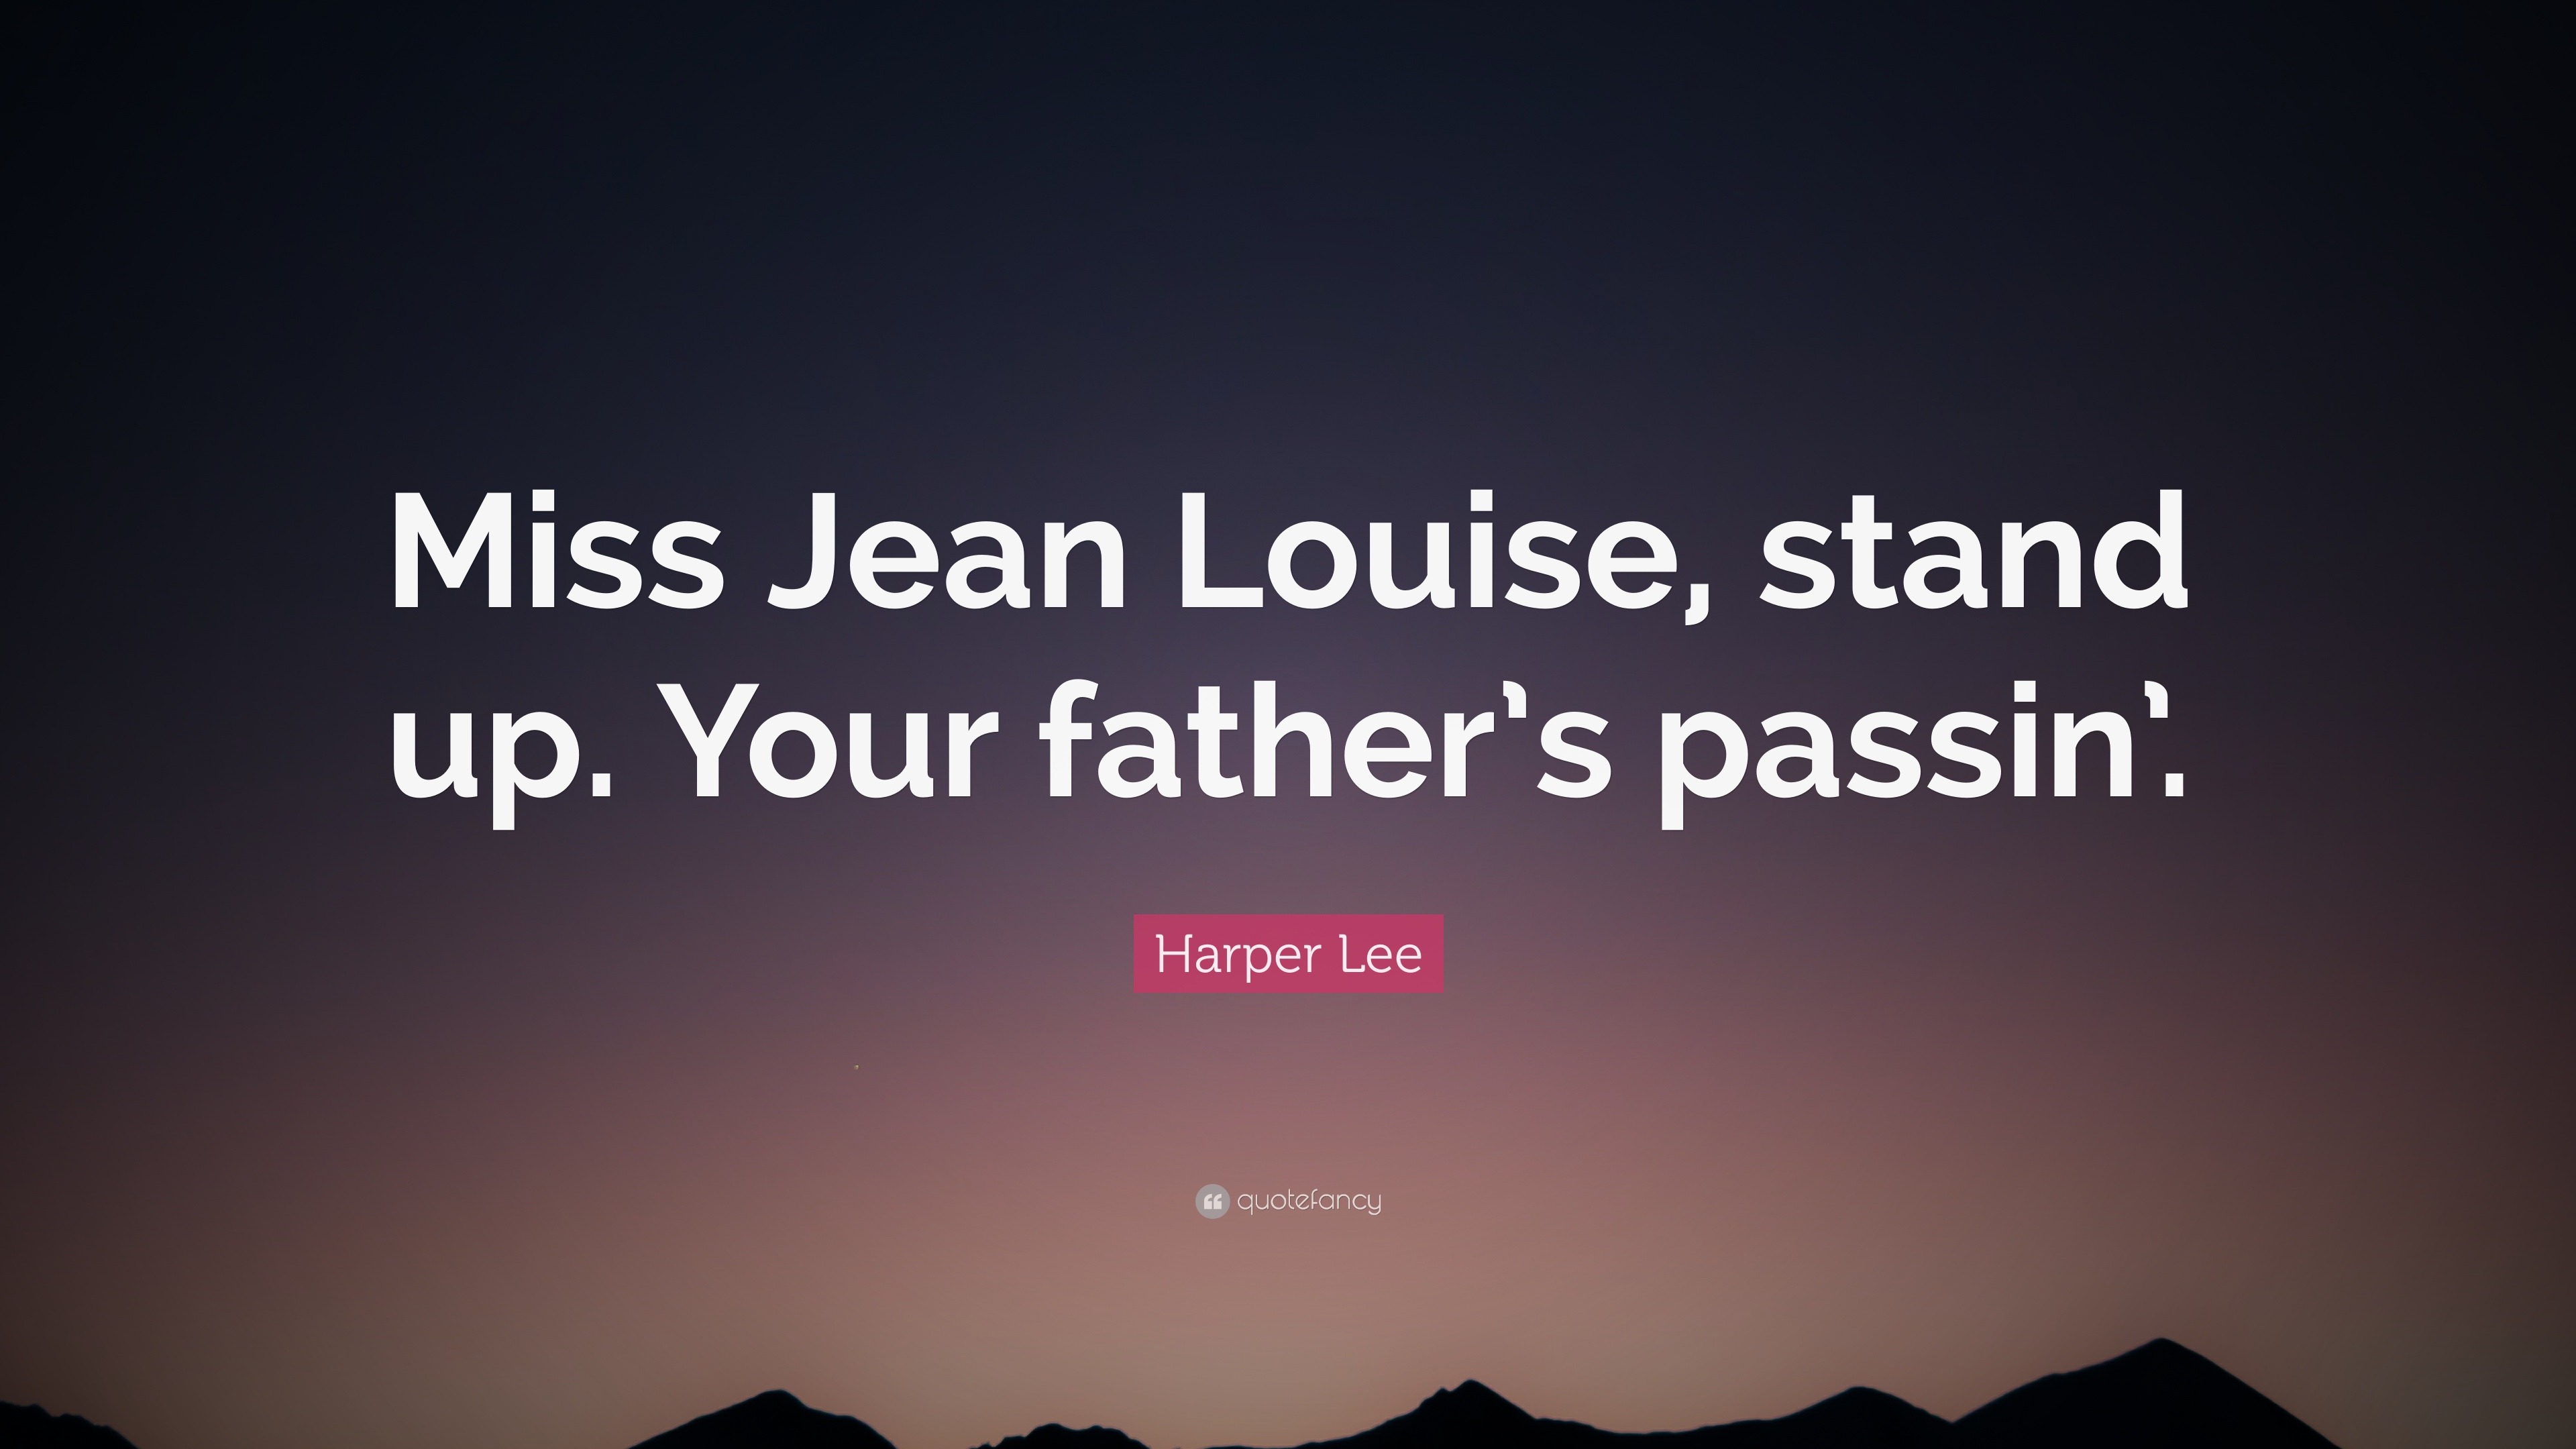 Retouch aften Vend tilbage Harper Lee Quote: “Miss Jean Louise, stand up. Your father's passin'.”